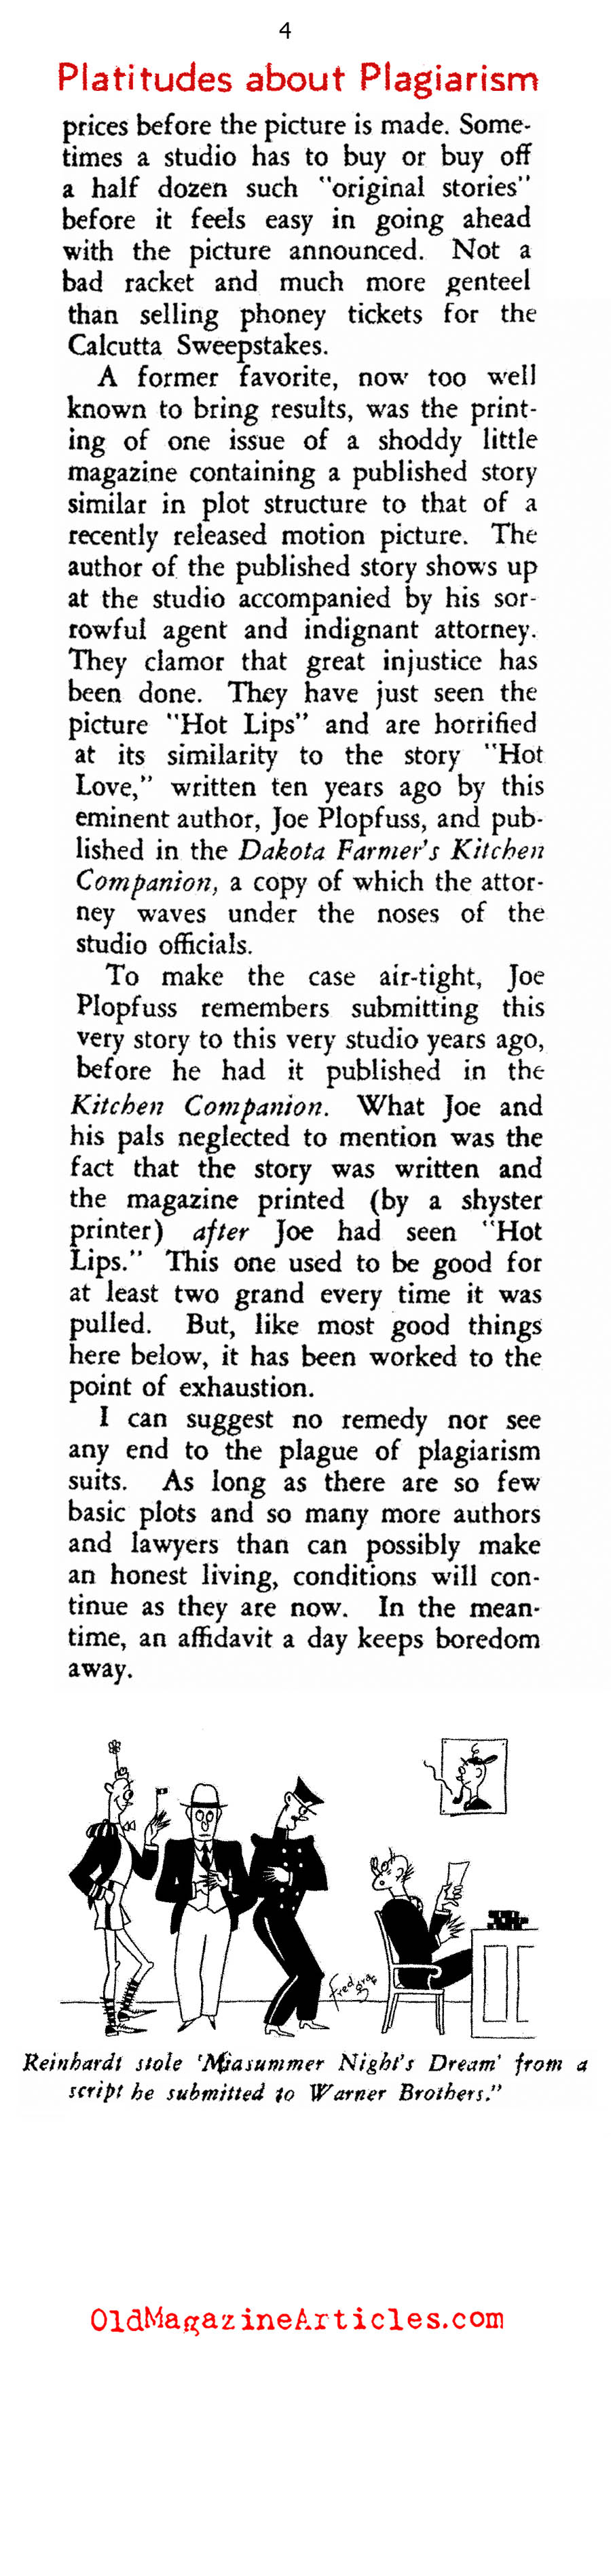 Hollywood and the Game of Bogus Plagiarism Law Suits (Rob Wagner's Script, 1935)